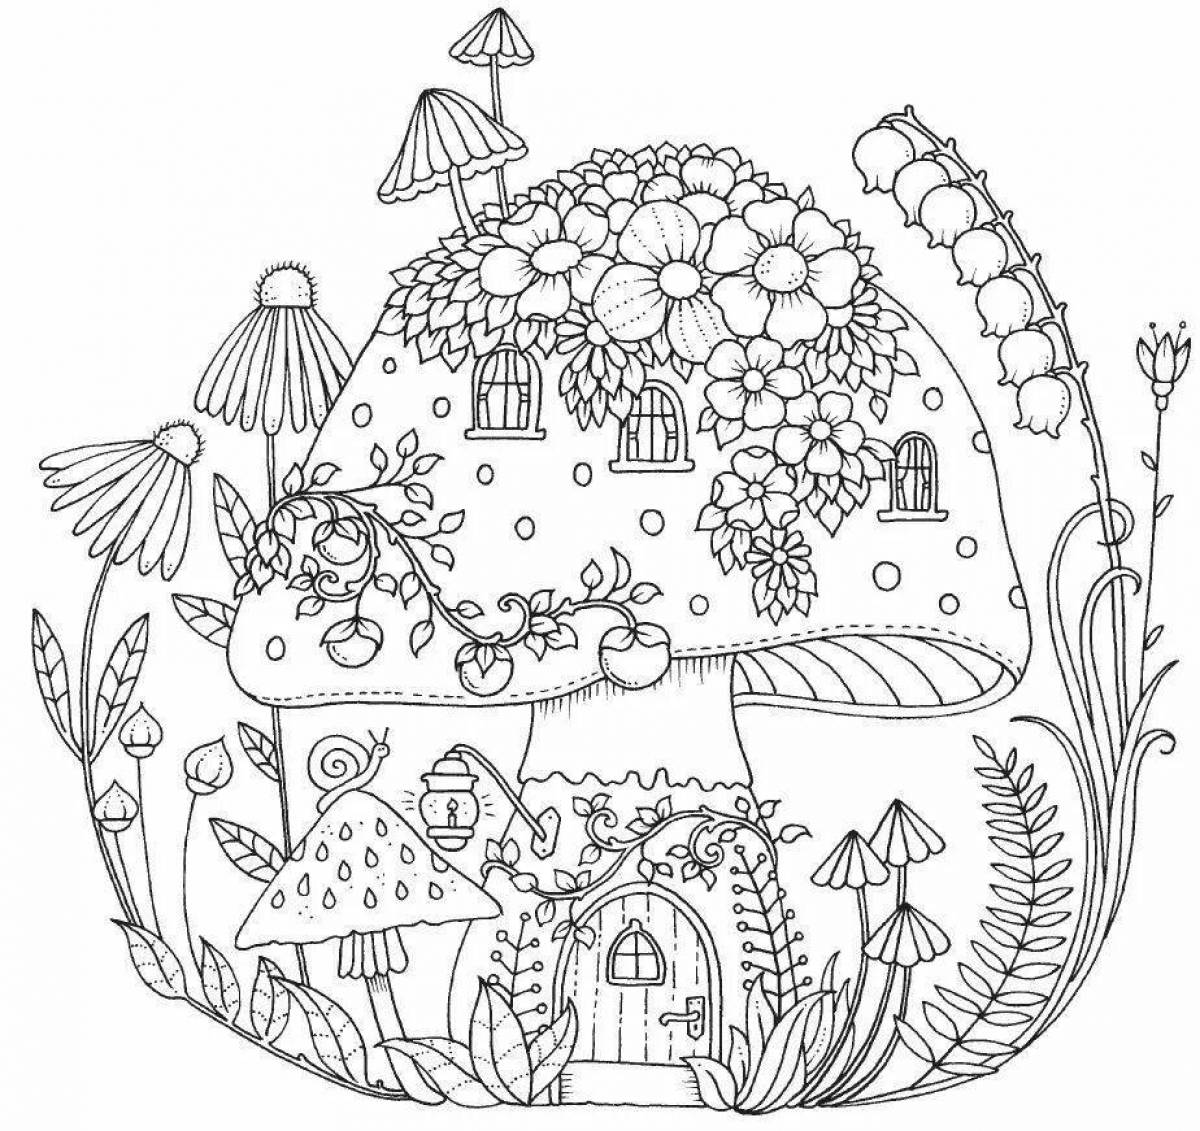 Amazing anti-stress forest coloring book